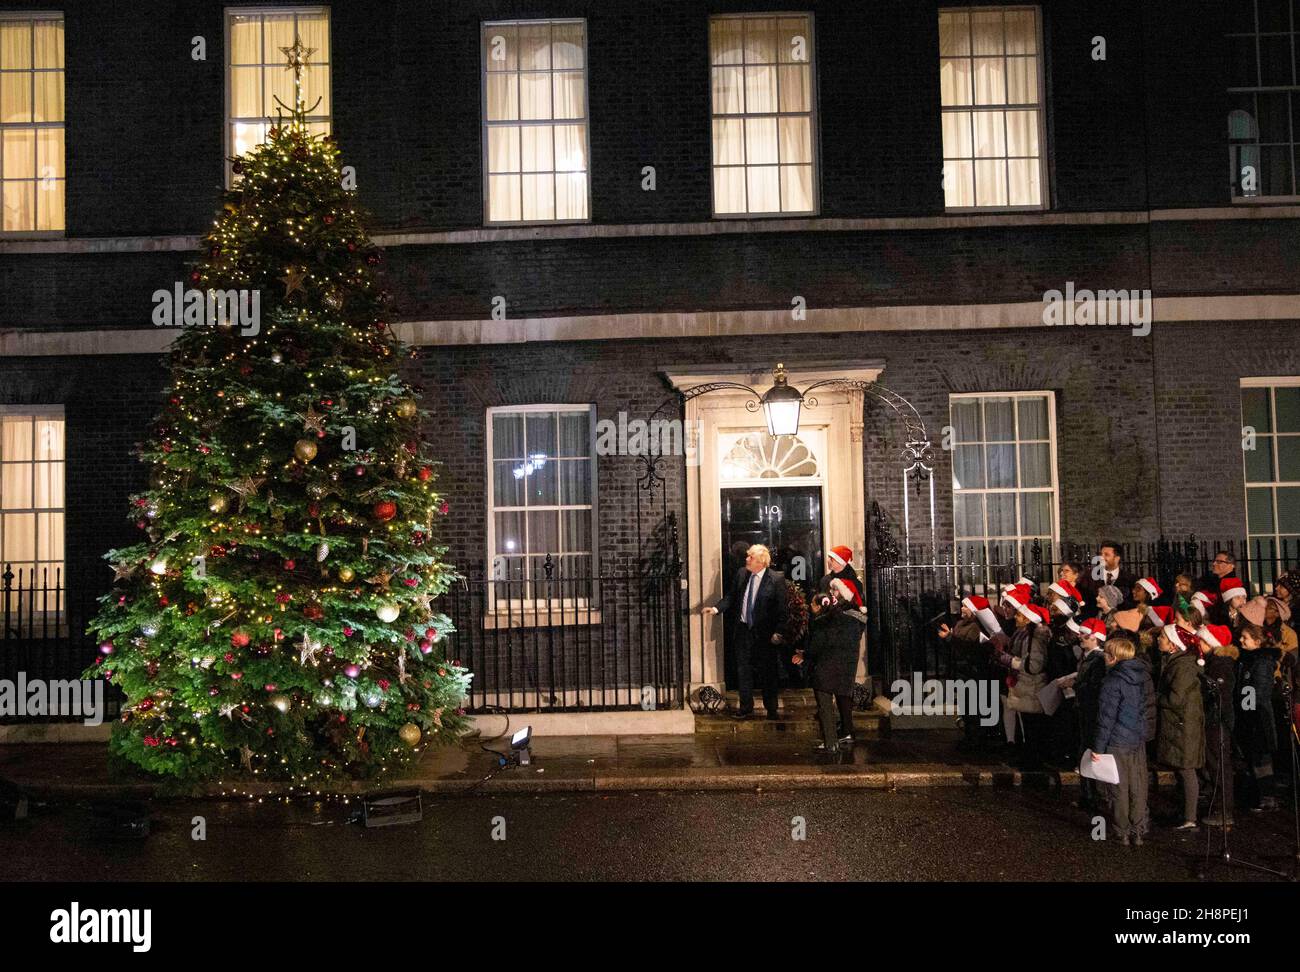 London, UK. 1st Dec, 2021. Prime Minister, Boris Johnson, switches on the Christmas tree lights at Downing Street. Credit: Tommy London/Alamy Live News Stock Photo